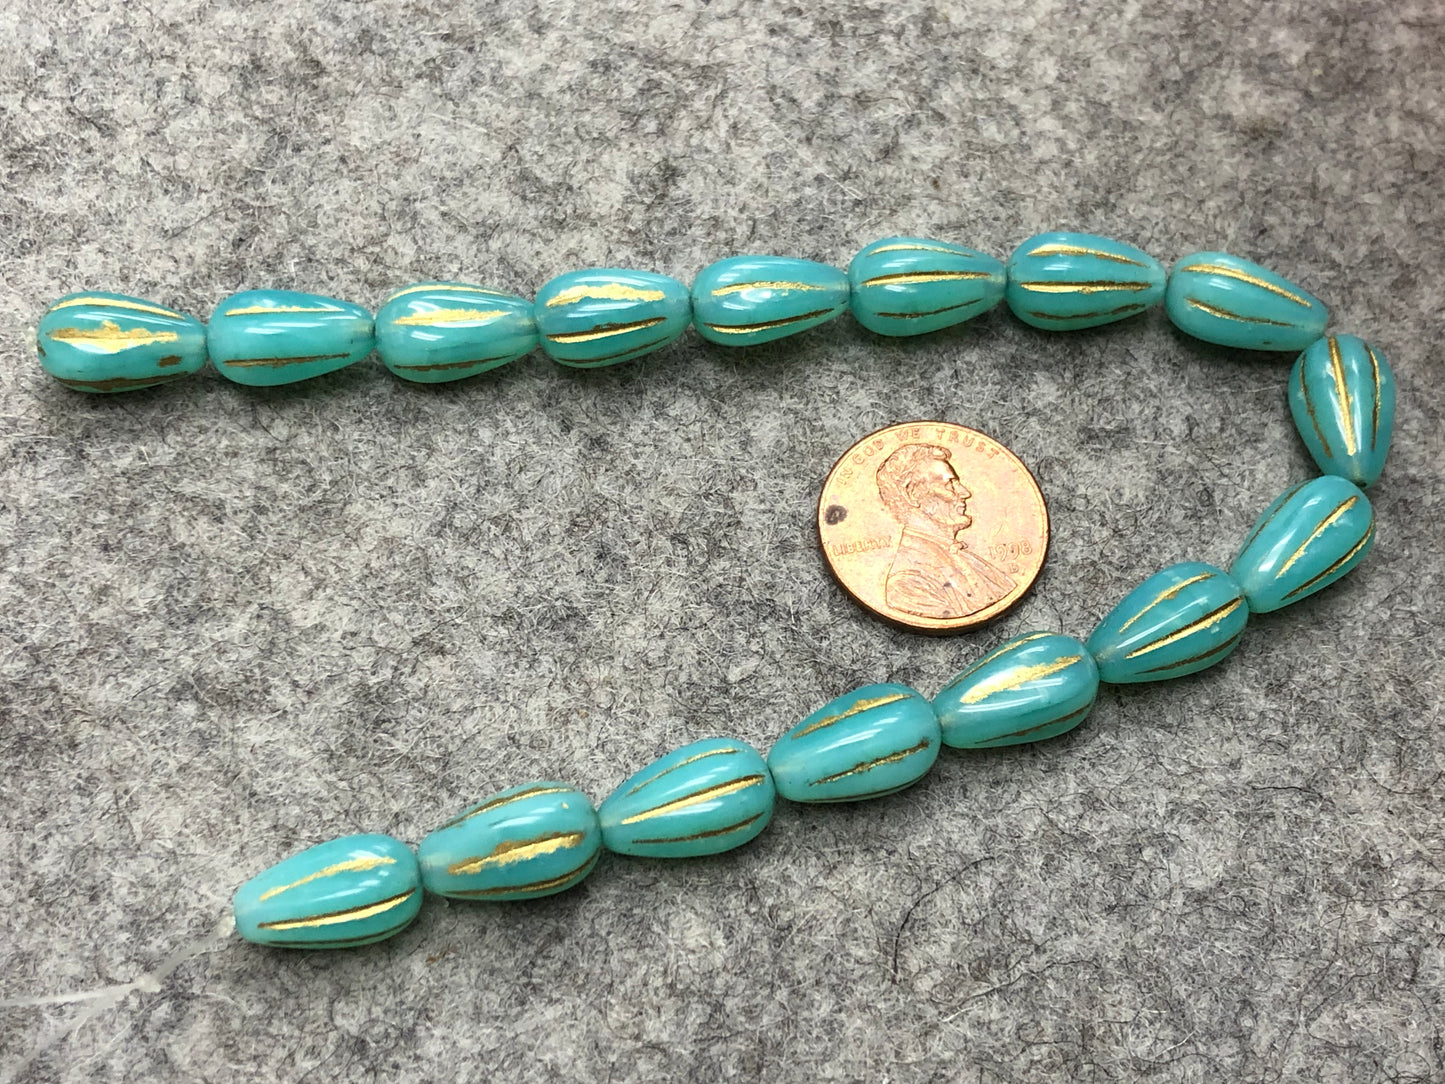 Turquoise Opal Melon Drops with Gold Wash Pressed Czech Glass Beads